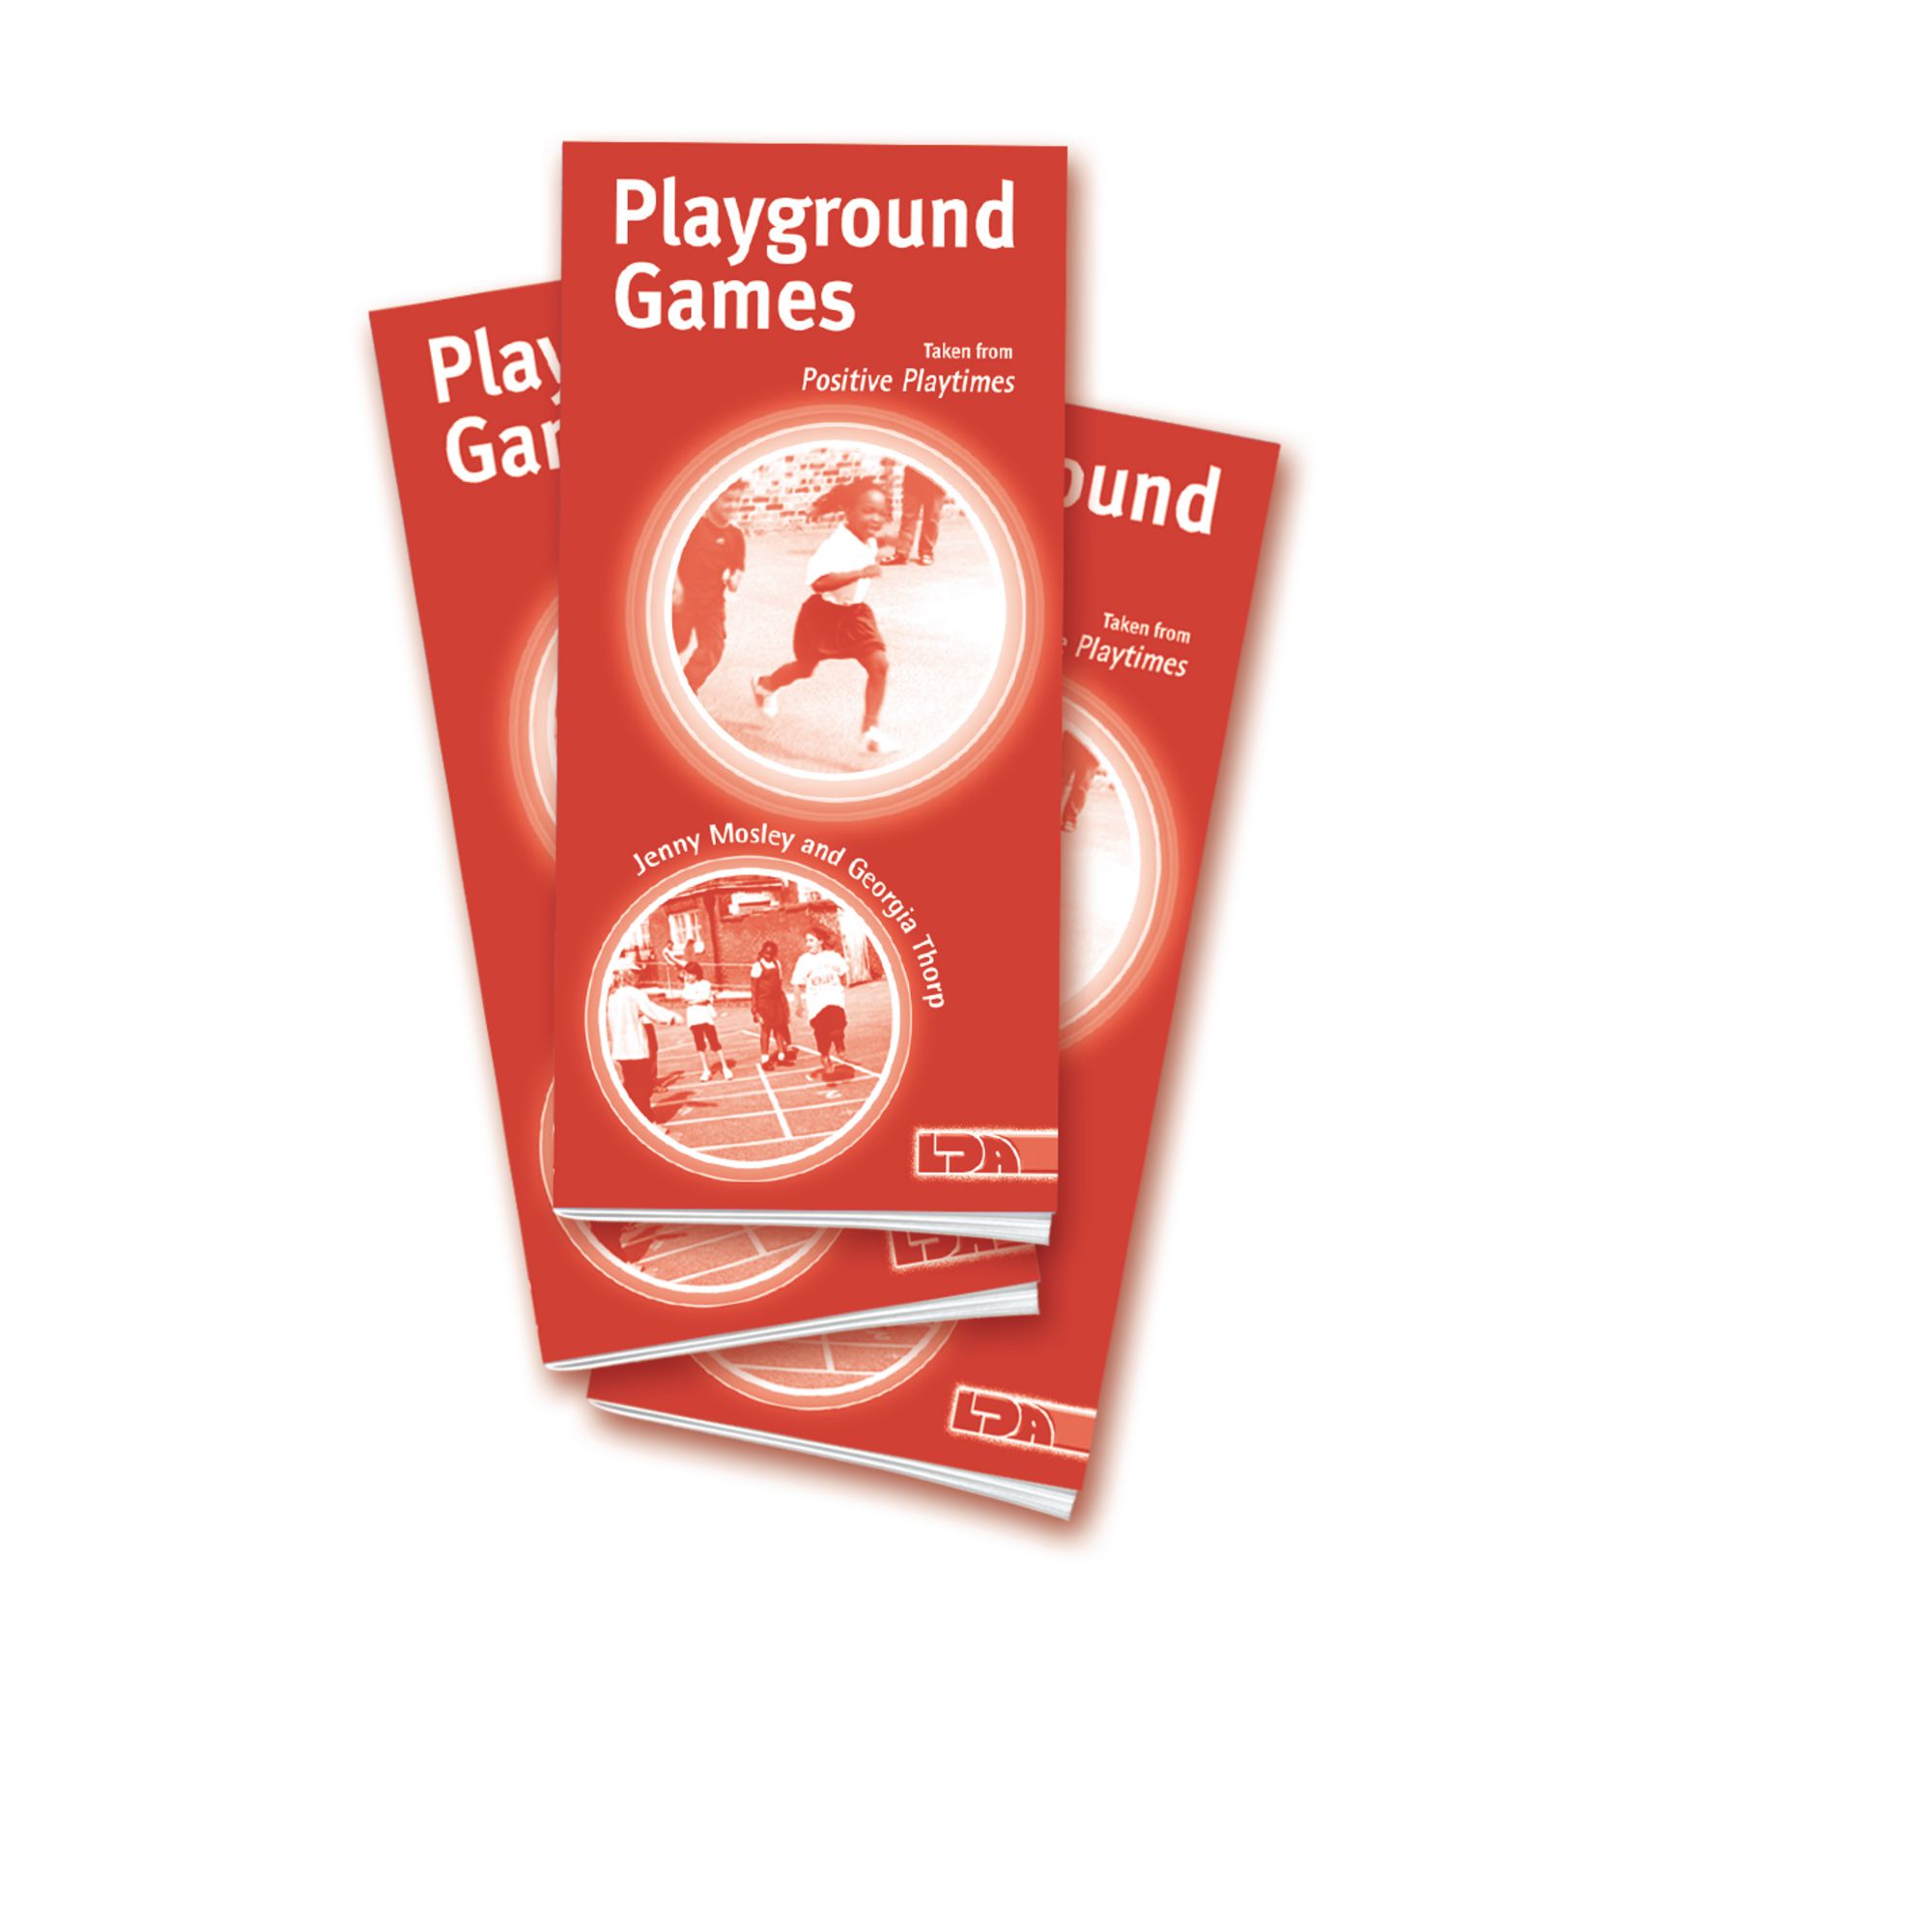 Traditional Playground Games Books